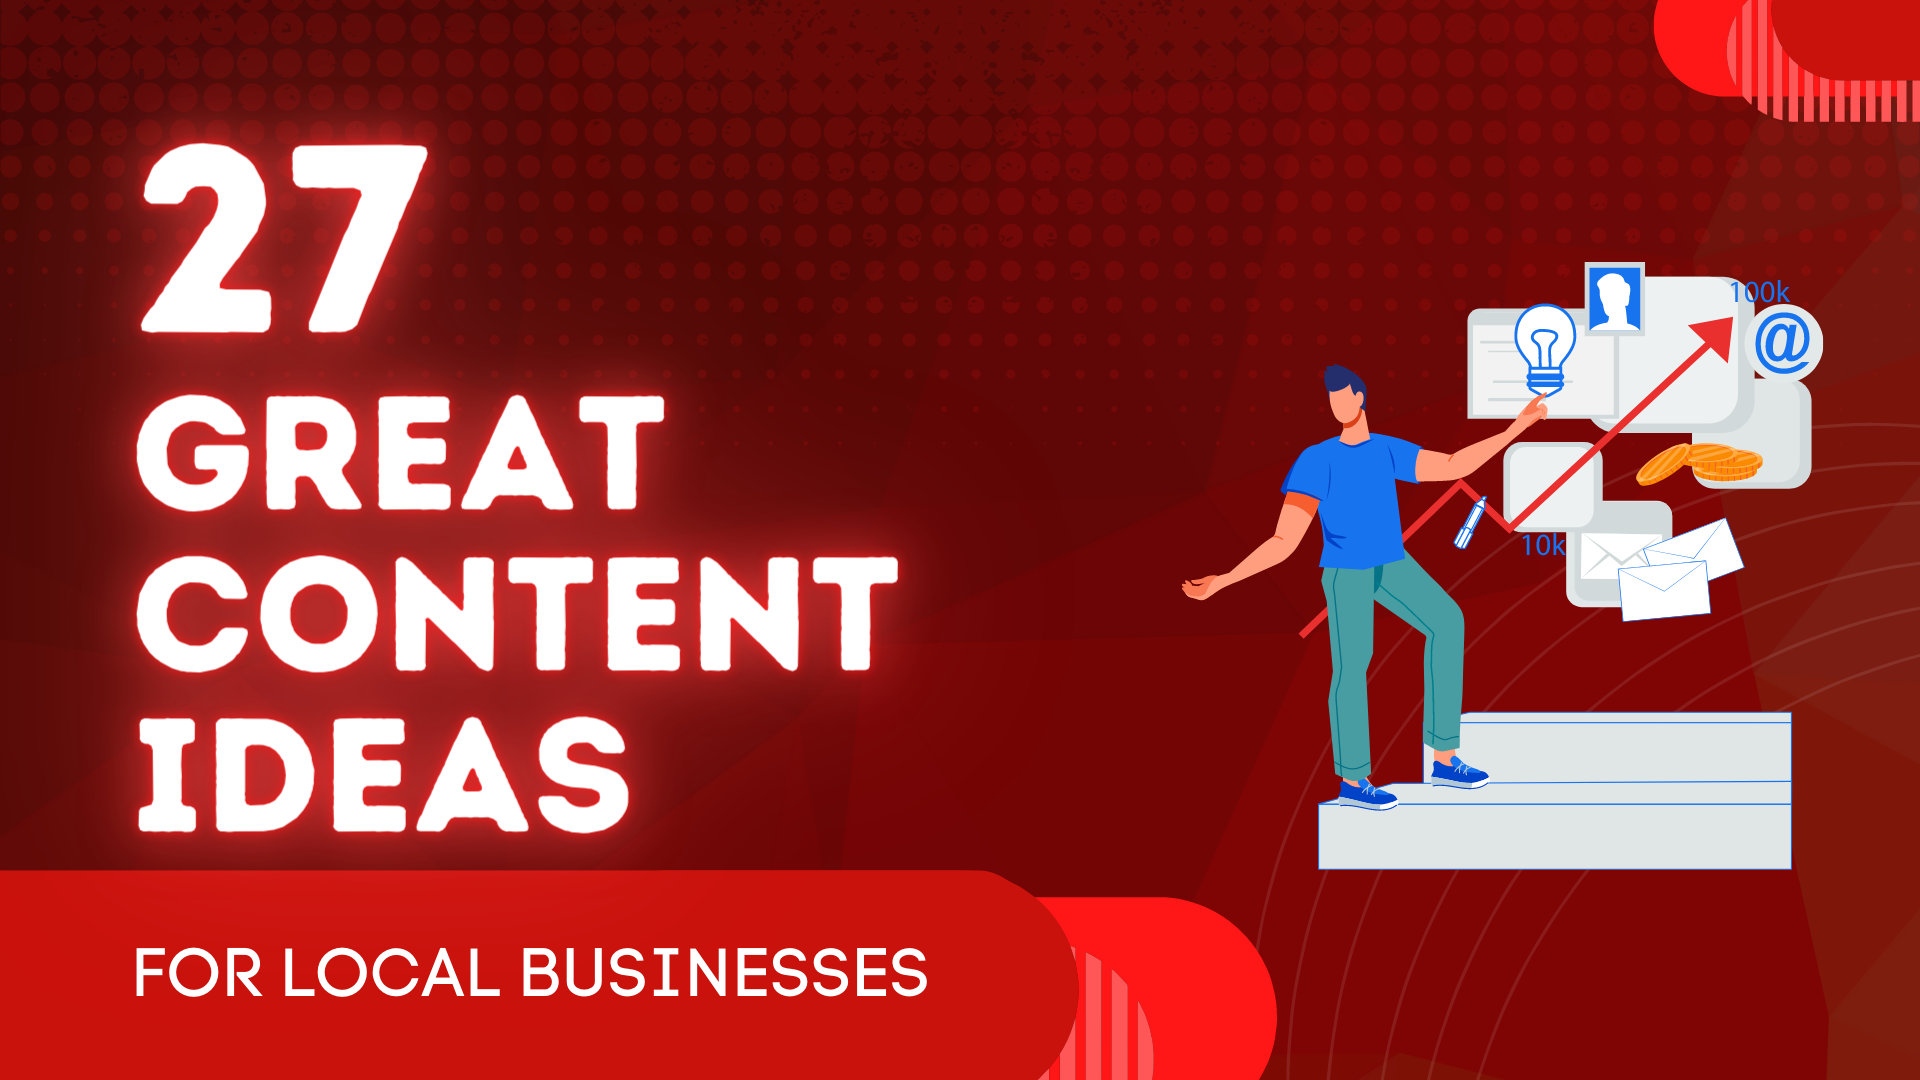 27 Great Content Ideas for Your Local Business